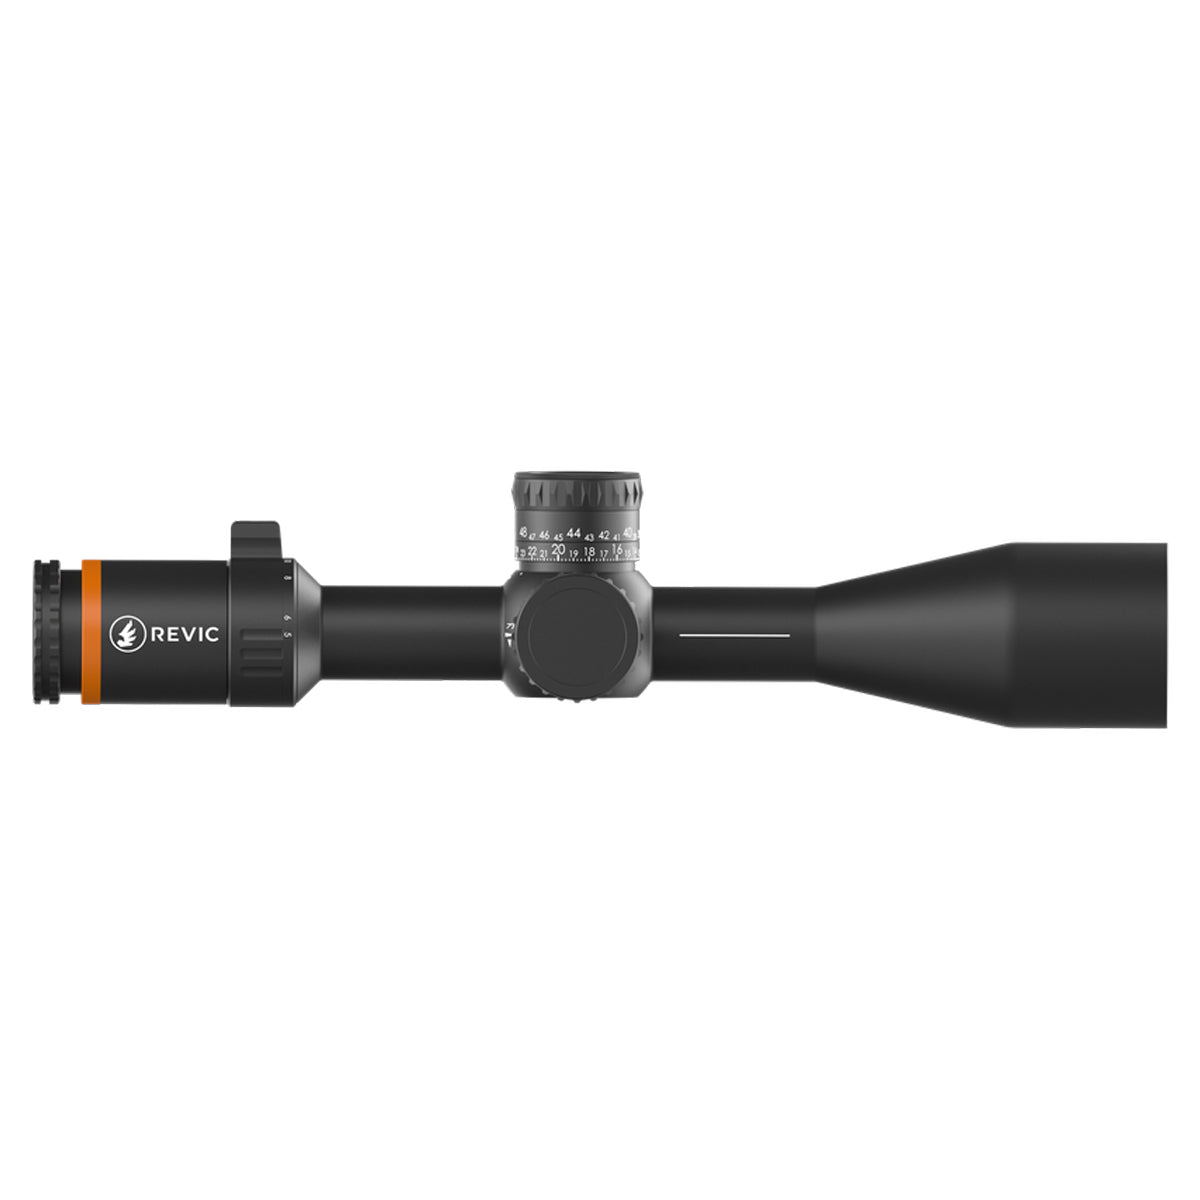 Revic Acura RS25i 5-25x50 Illuminated Riflescope in  by GOHUNT | Revic - GOHUNT Shop